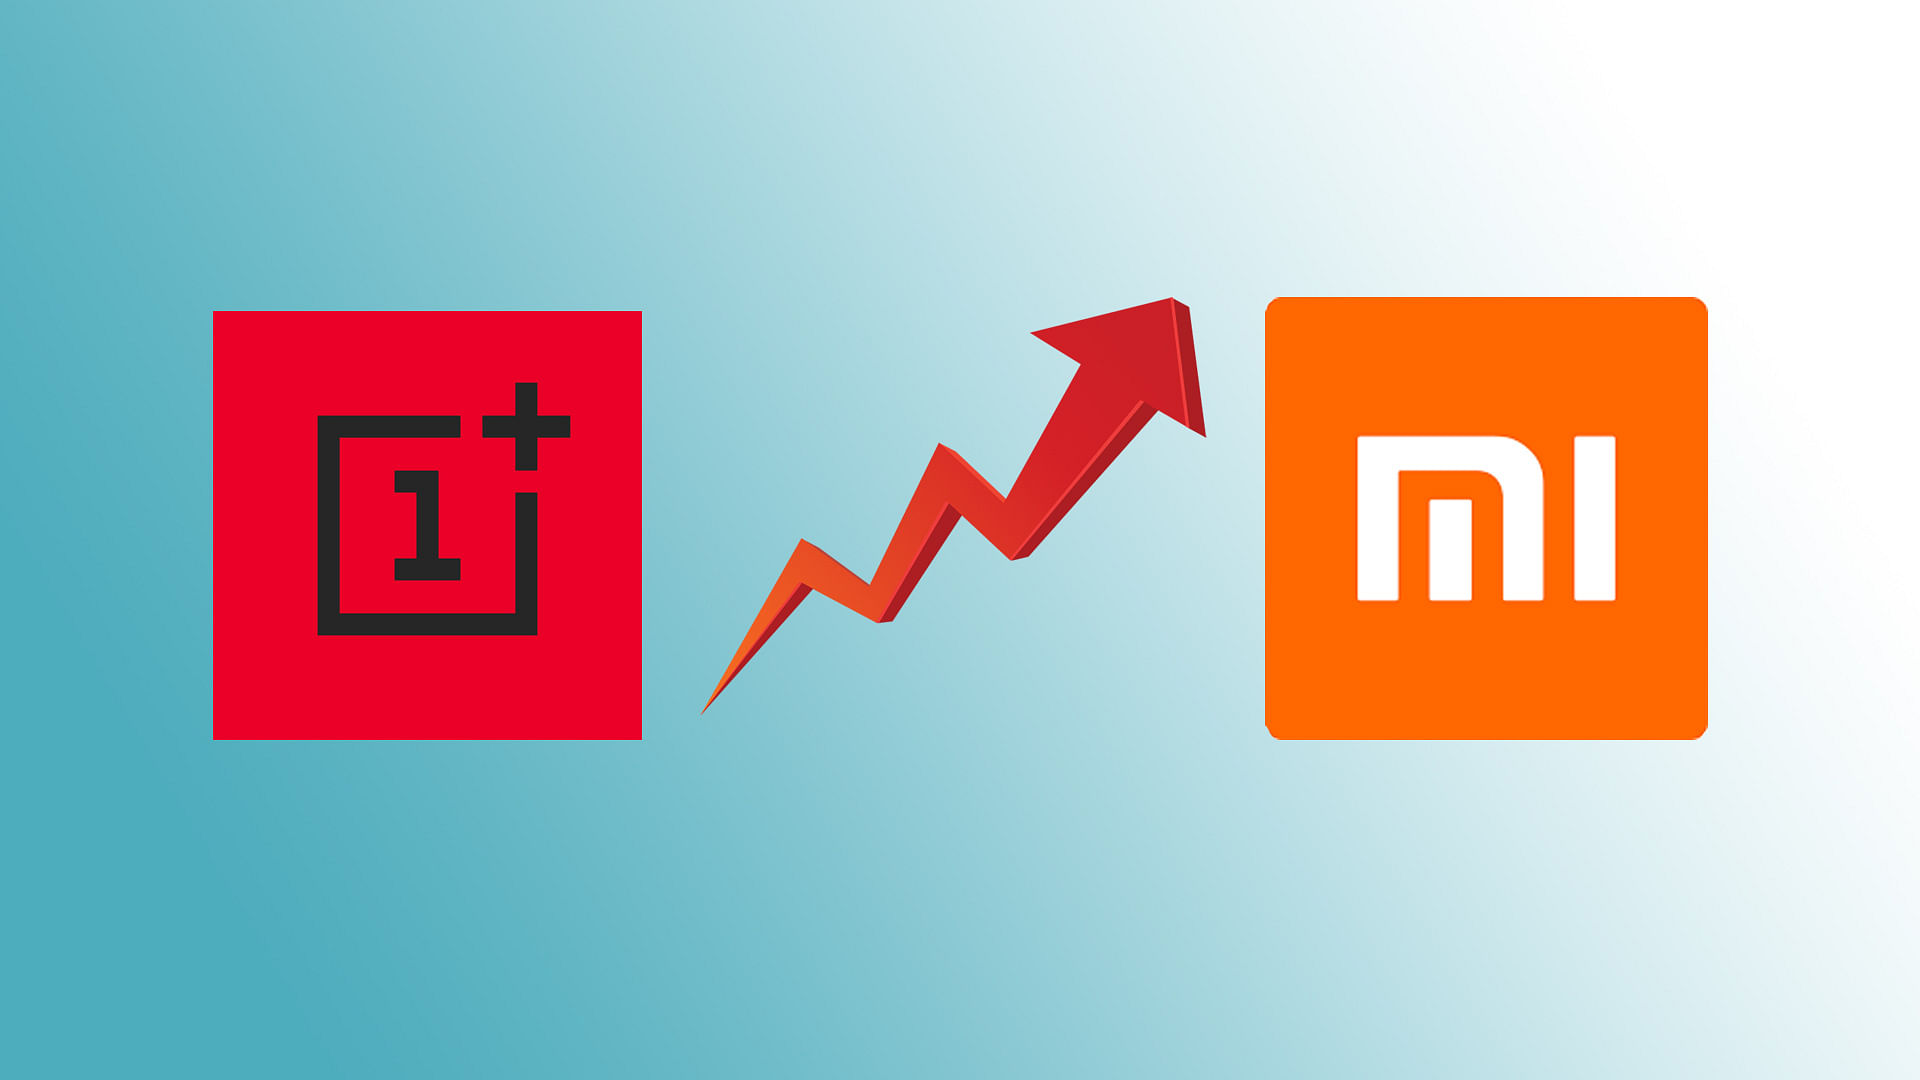 Both OnePlus and Xiaomi have has a good response to their respective online sales post the India-China conflict at the borders.